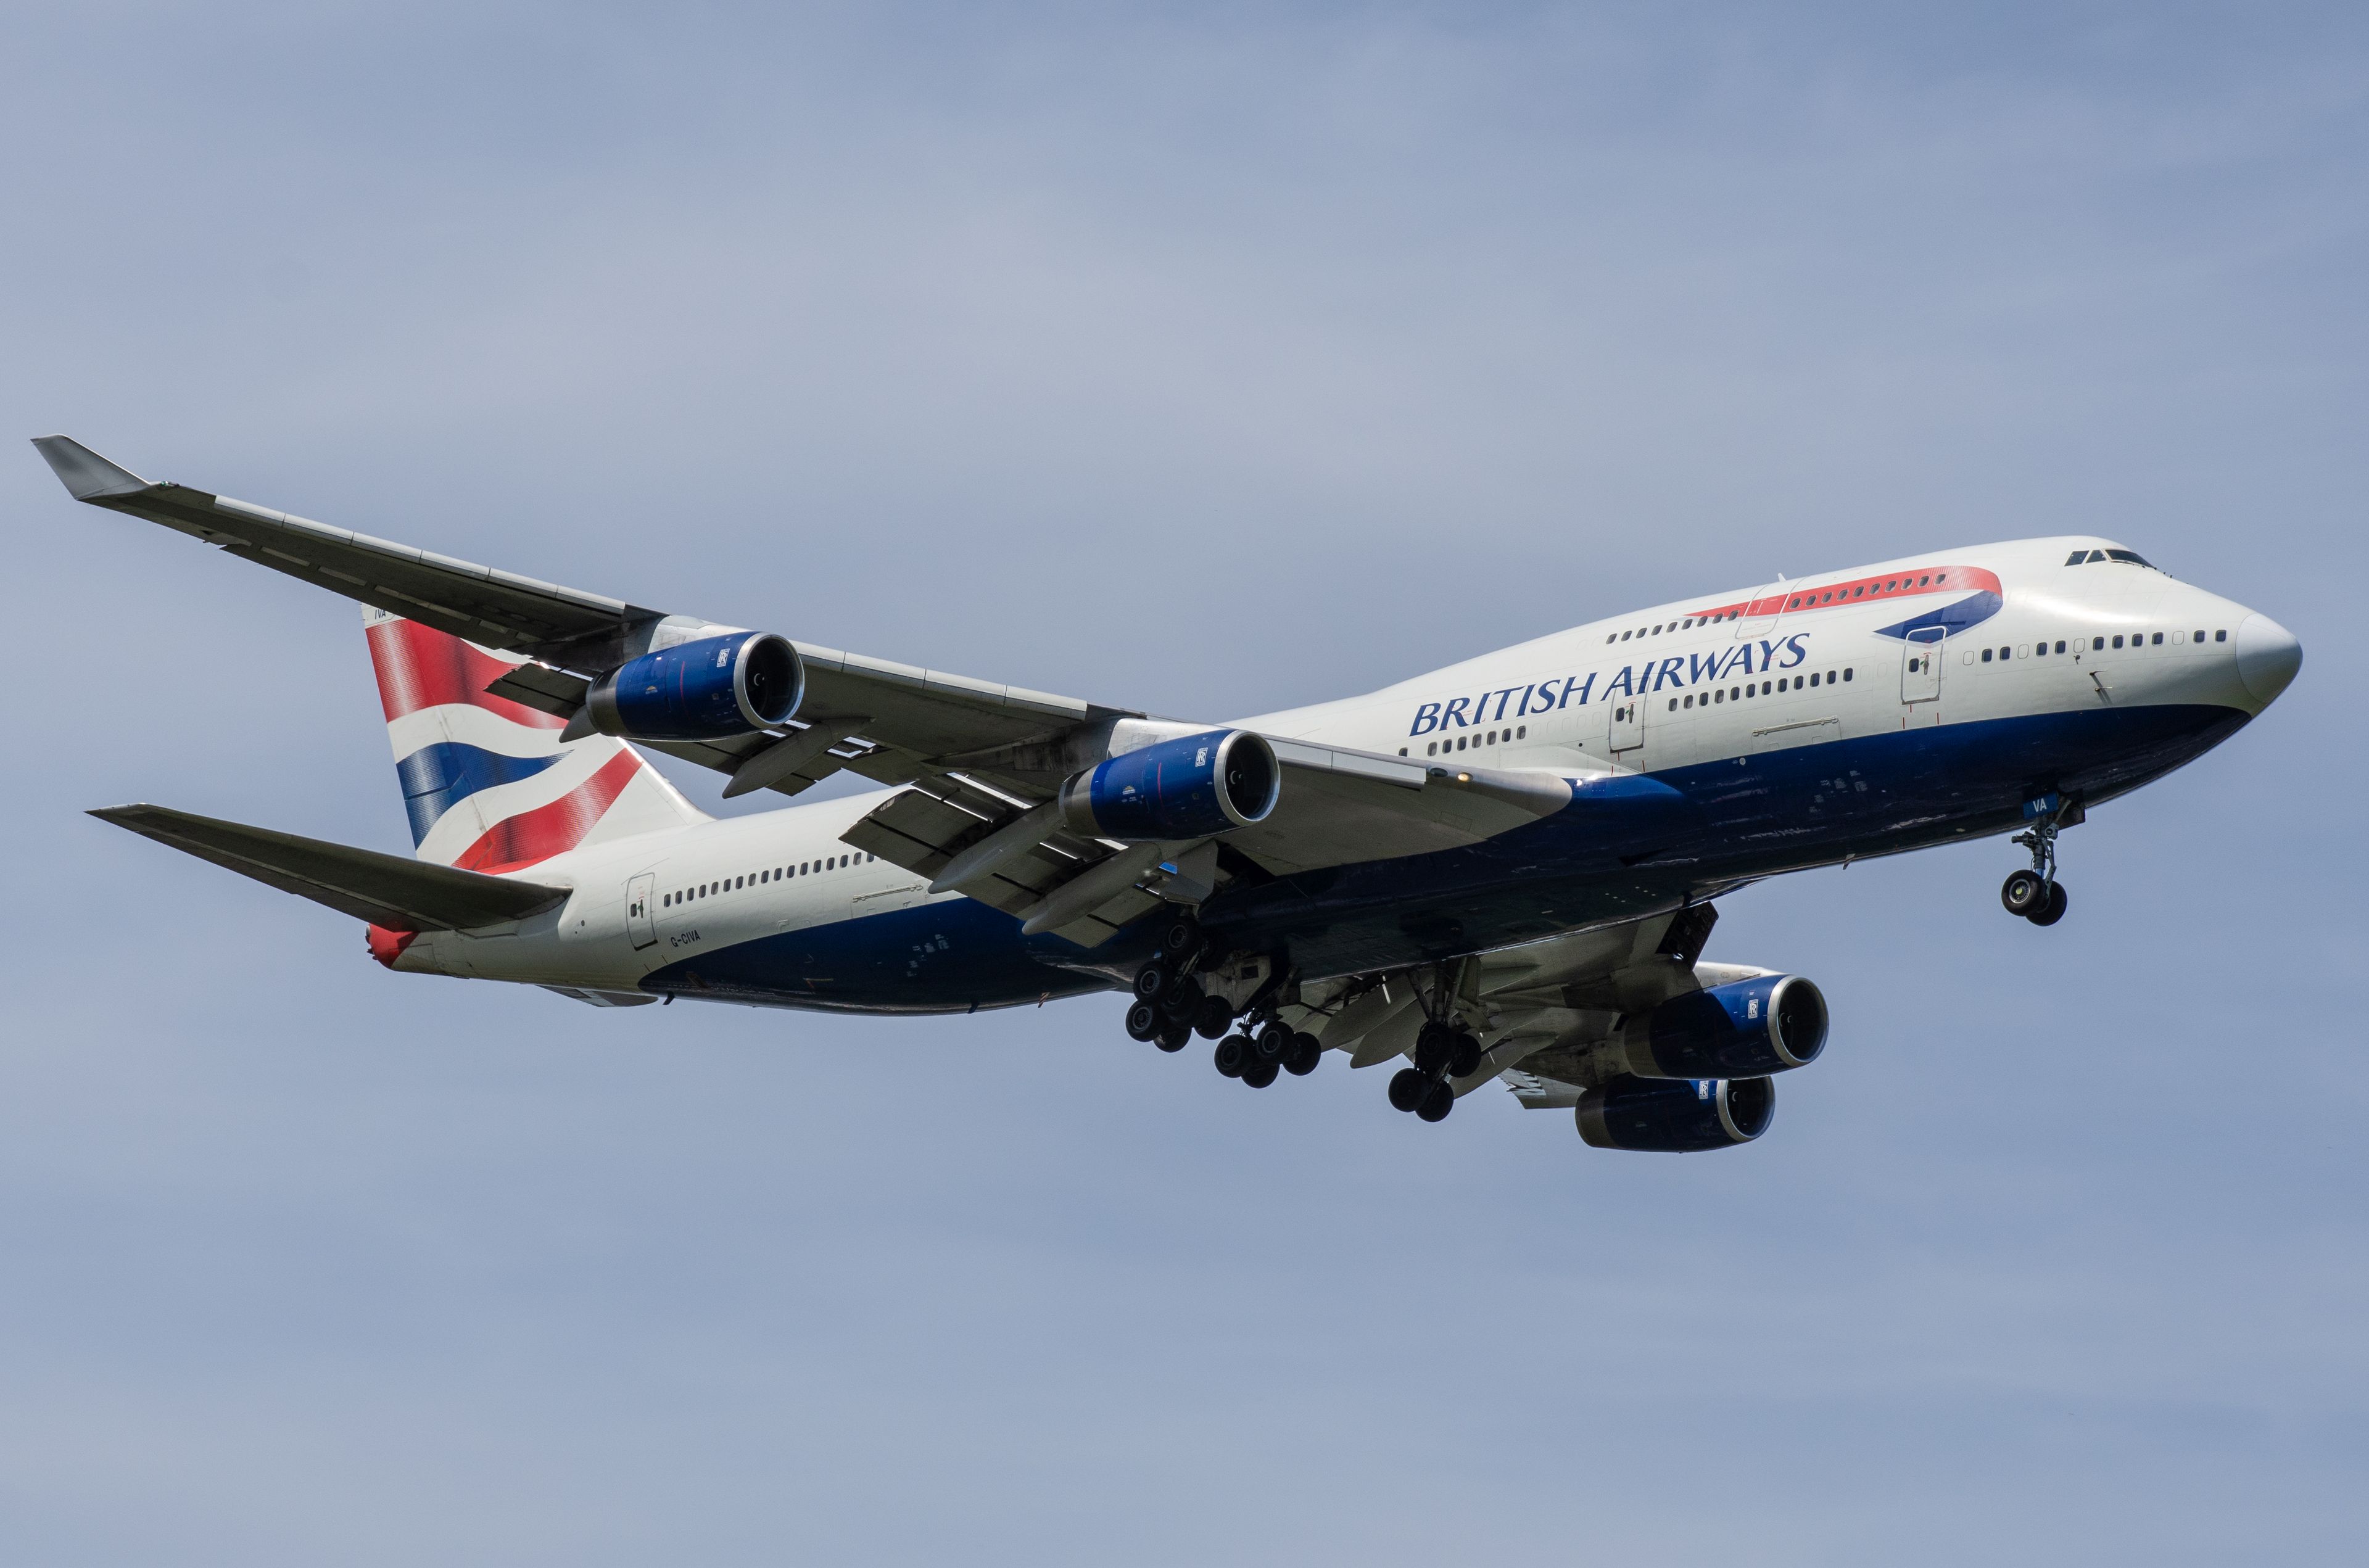 G-CIVA/GCIVA Withdrawn from use Boeing 747 Airframe Information - AVSpotters.com